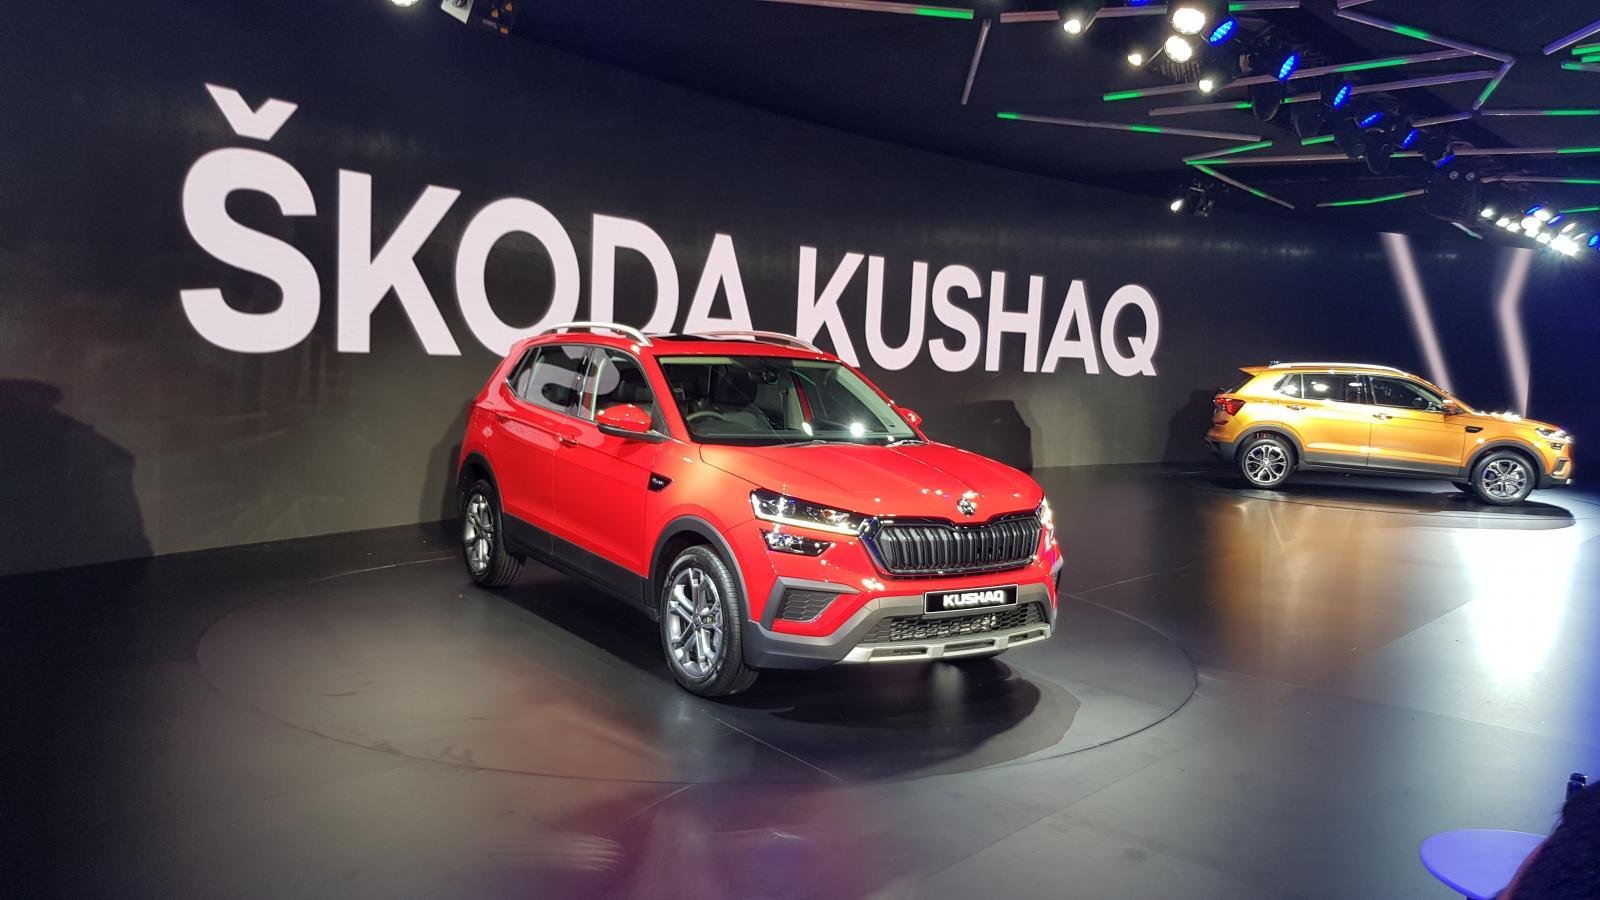 Upcoming Skoda Kushaq Will Get A Smaller Sunroof Compared To Rivals